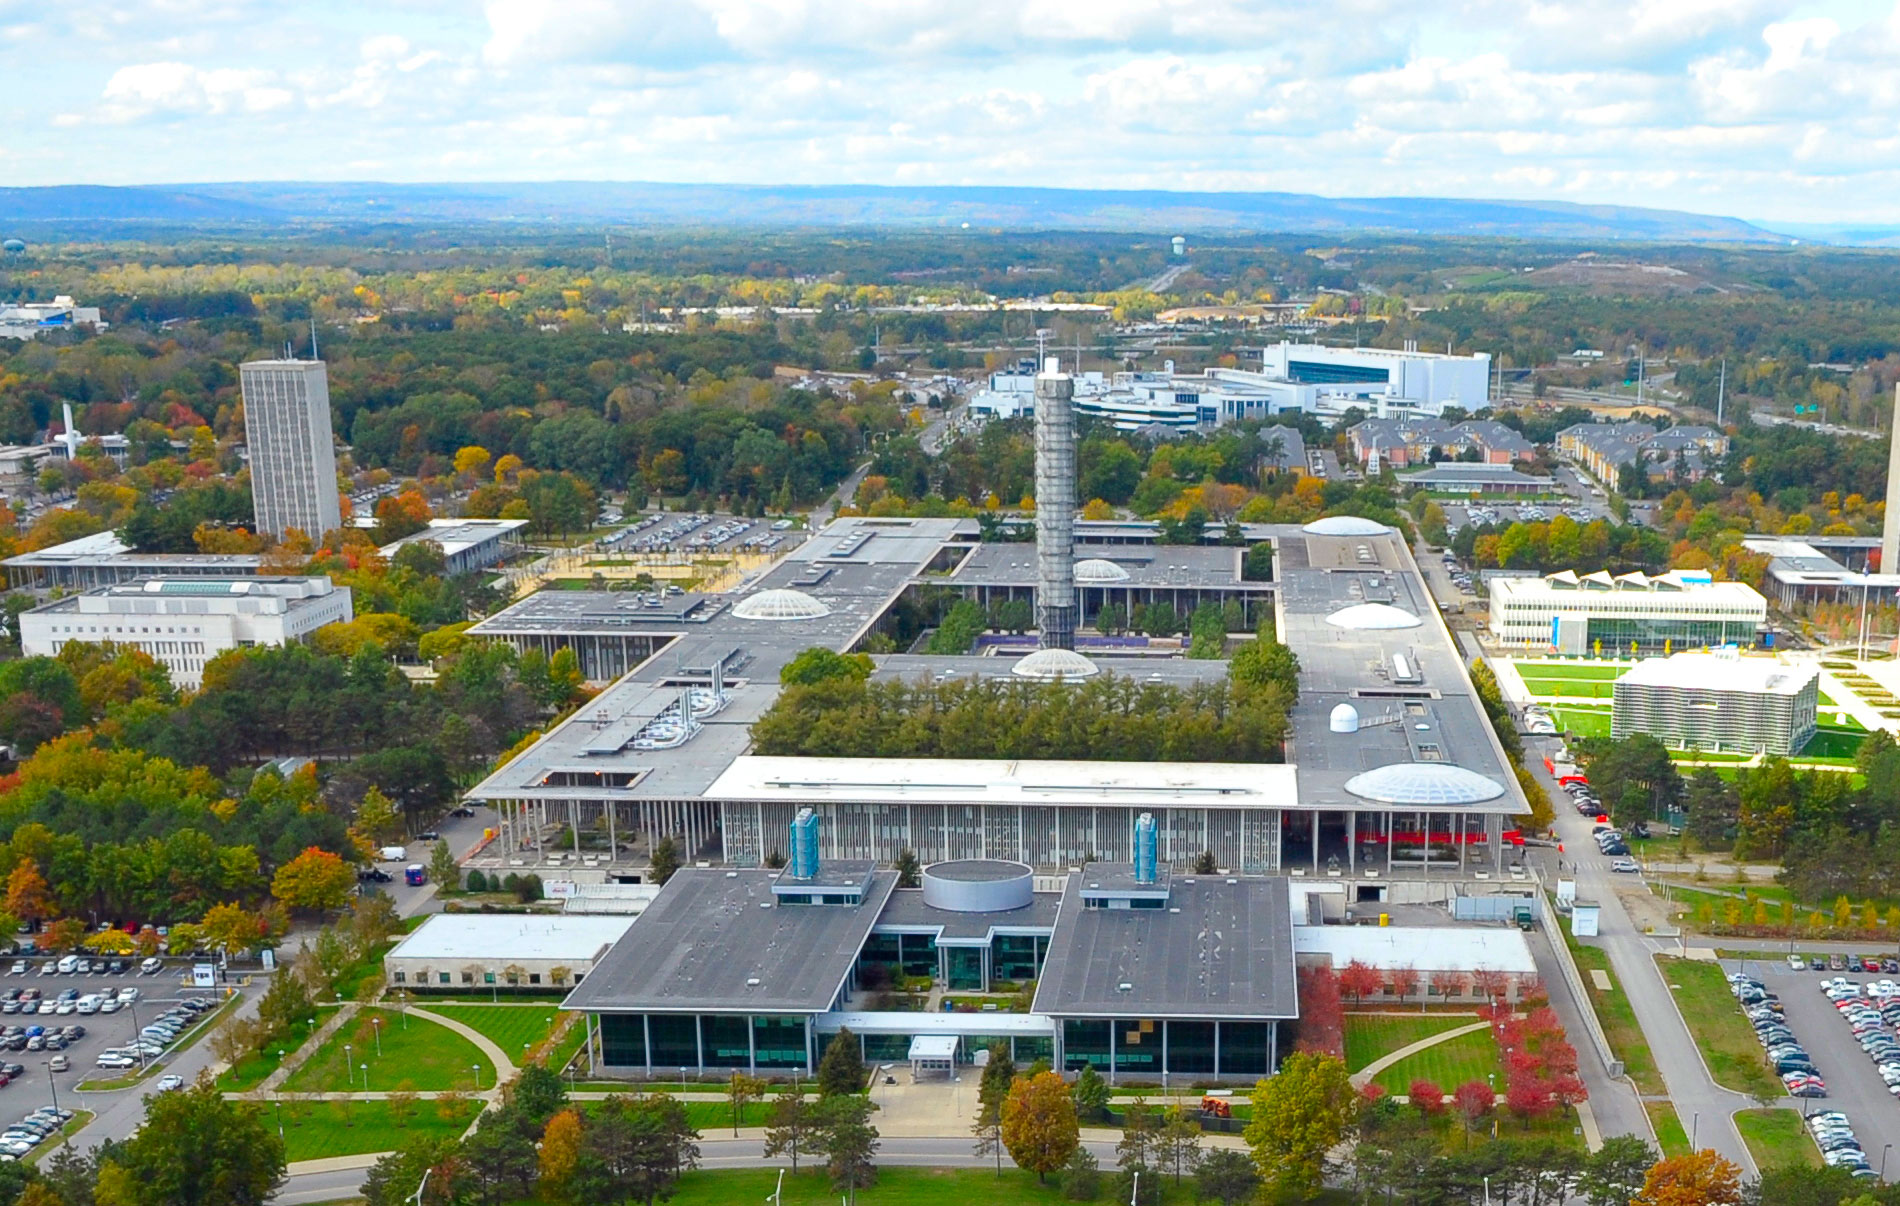 Aerial image of the uptown UAlbany campus